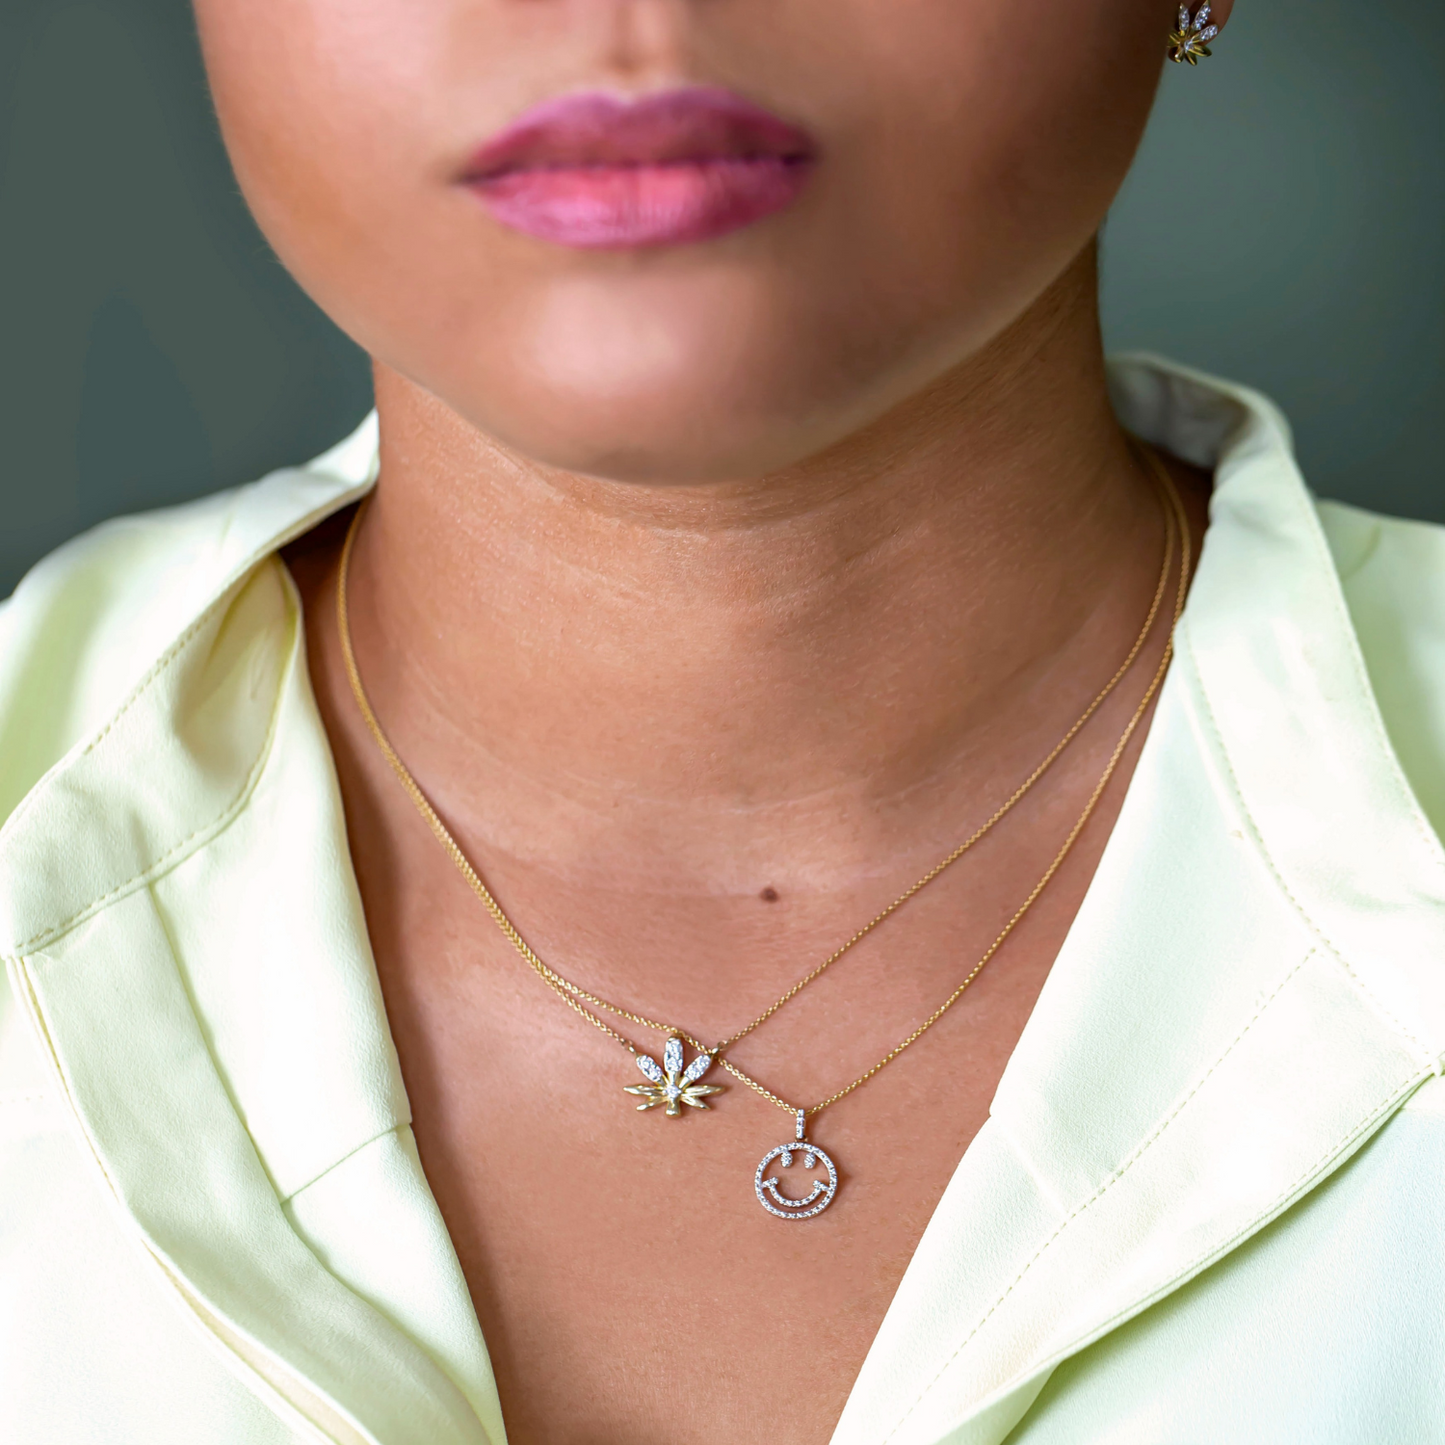 Mary Jane Diamond Leaf Necklace With Gold Chain In Lady's Neck In Different Shape